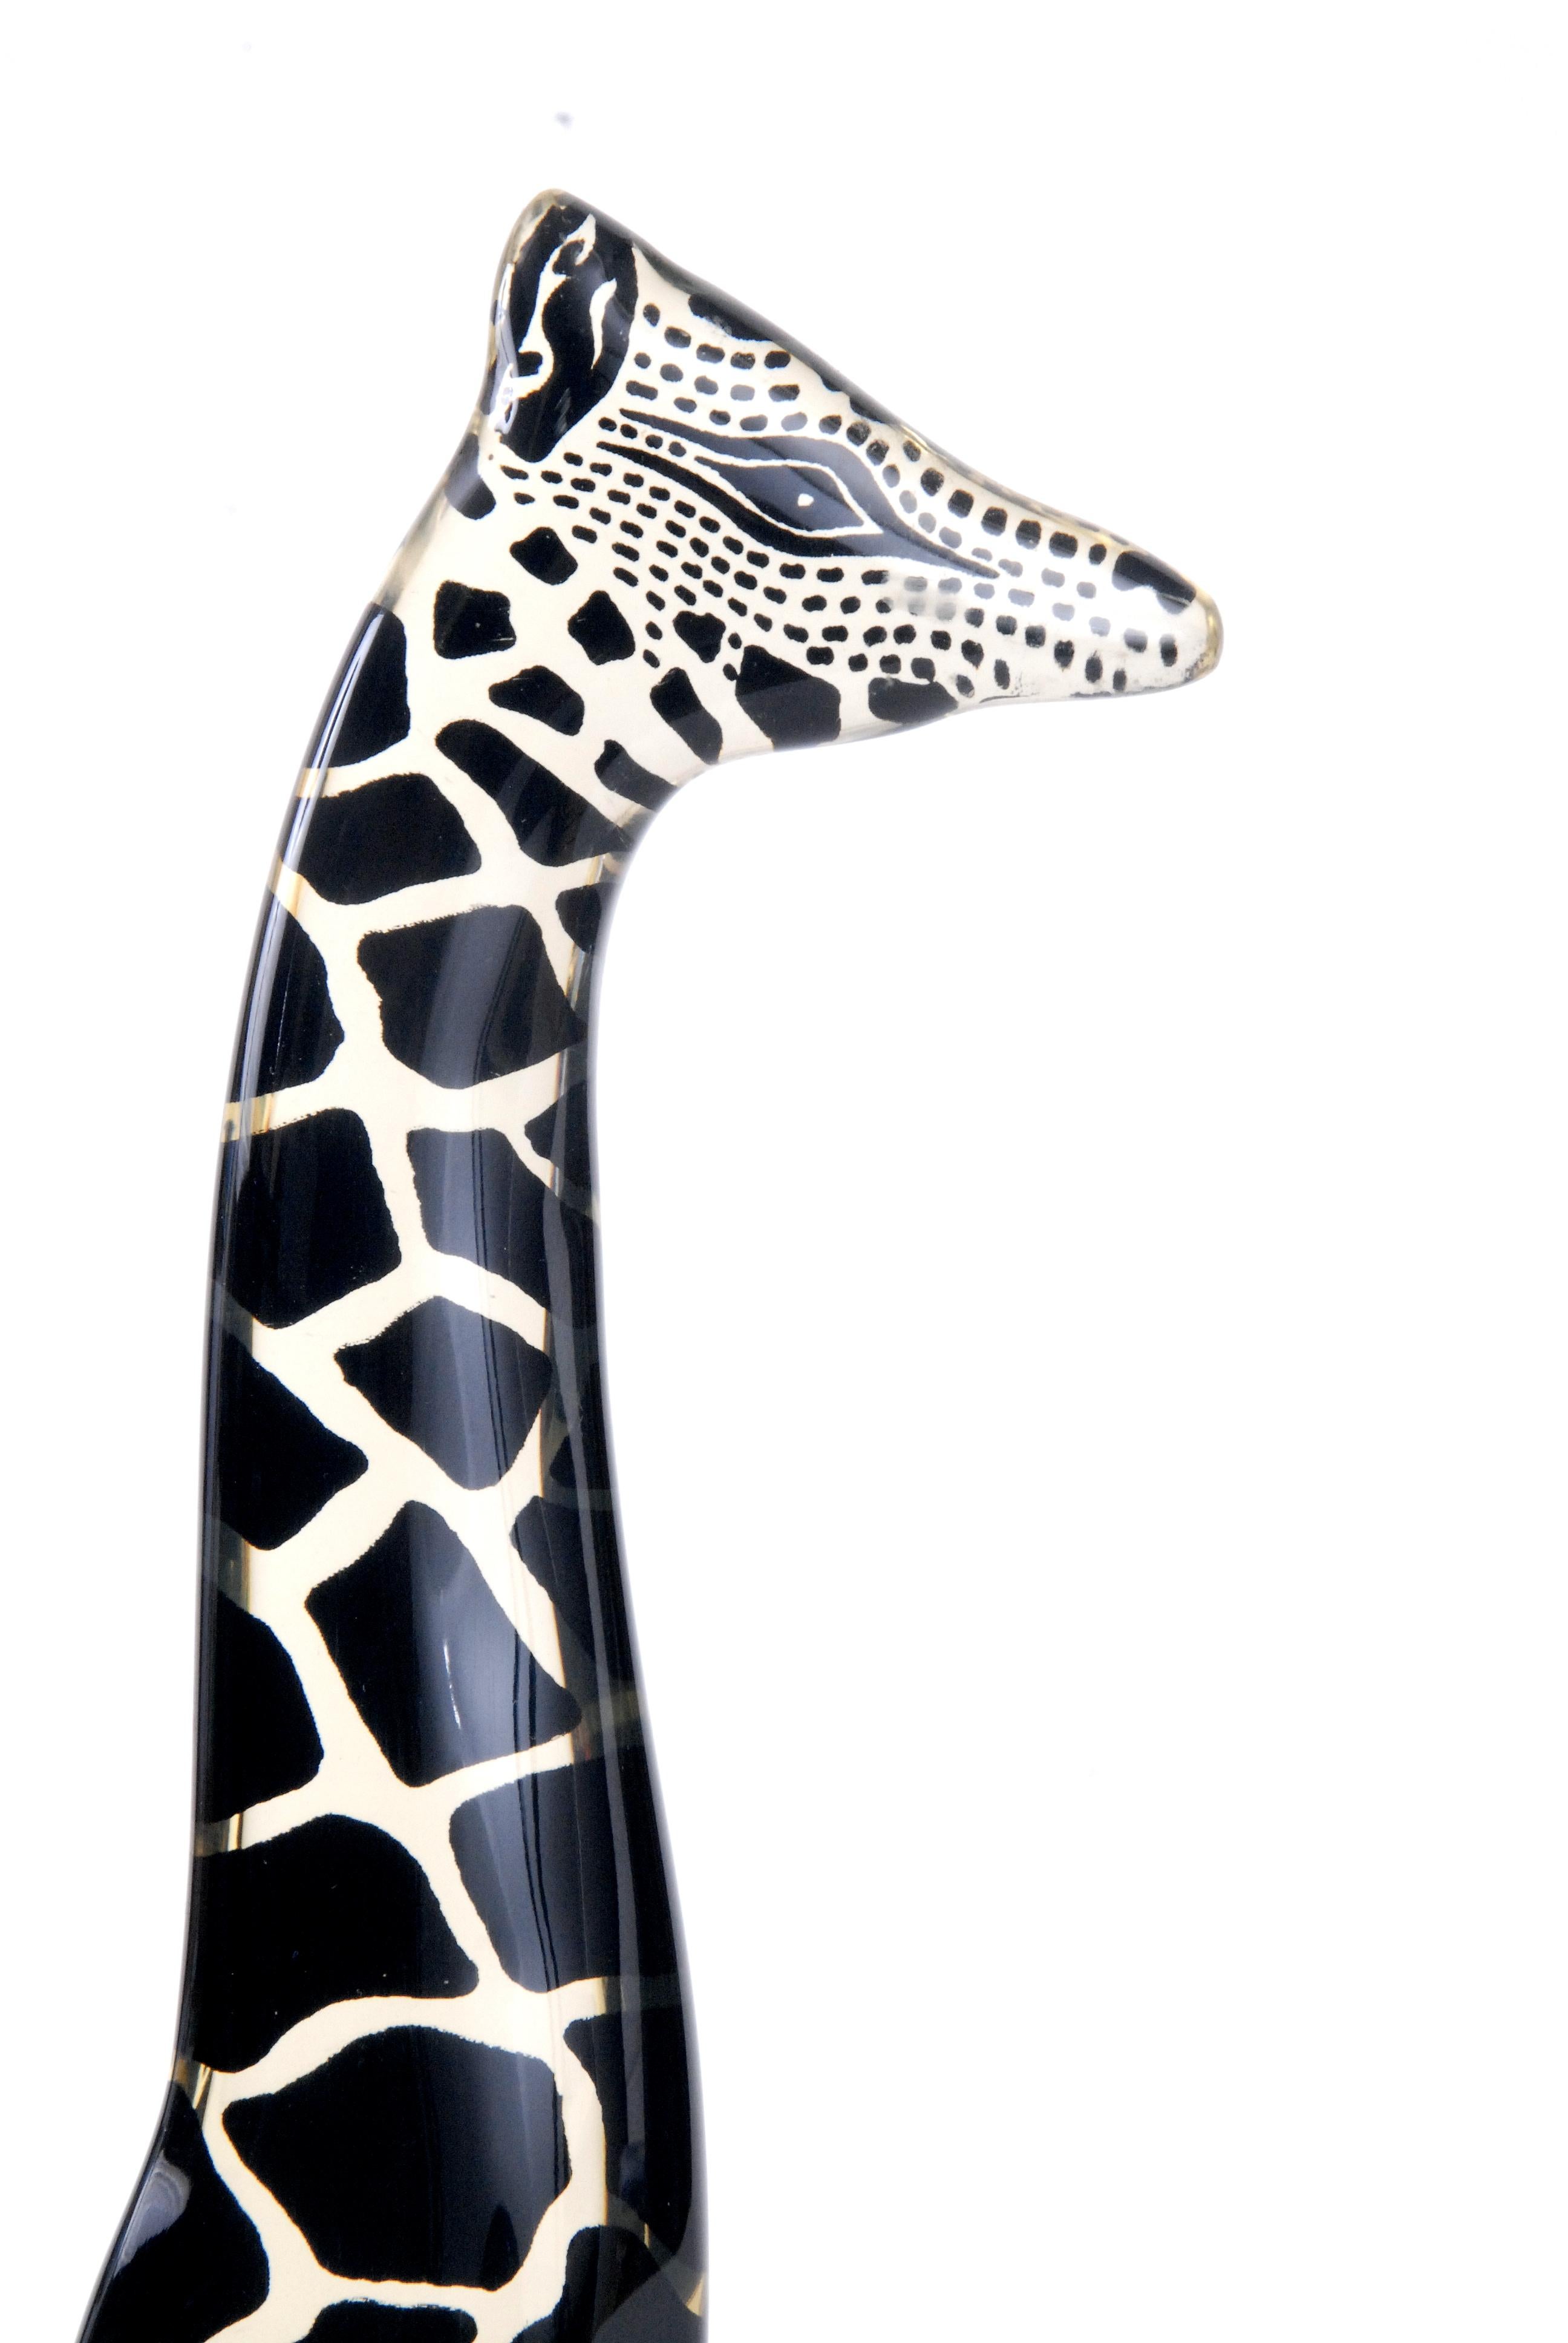 A large black giraffe in perfect condition with its label still attached, last photo shows comparison between the 2 giraffes listed for sale.
This one is 31.5 cm in height.